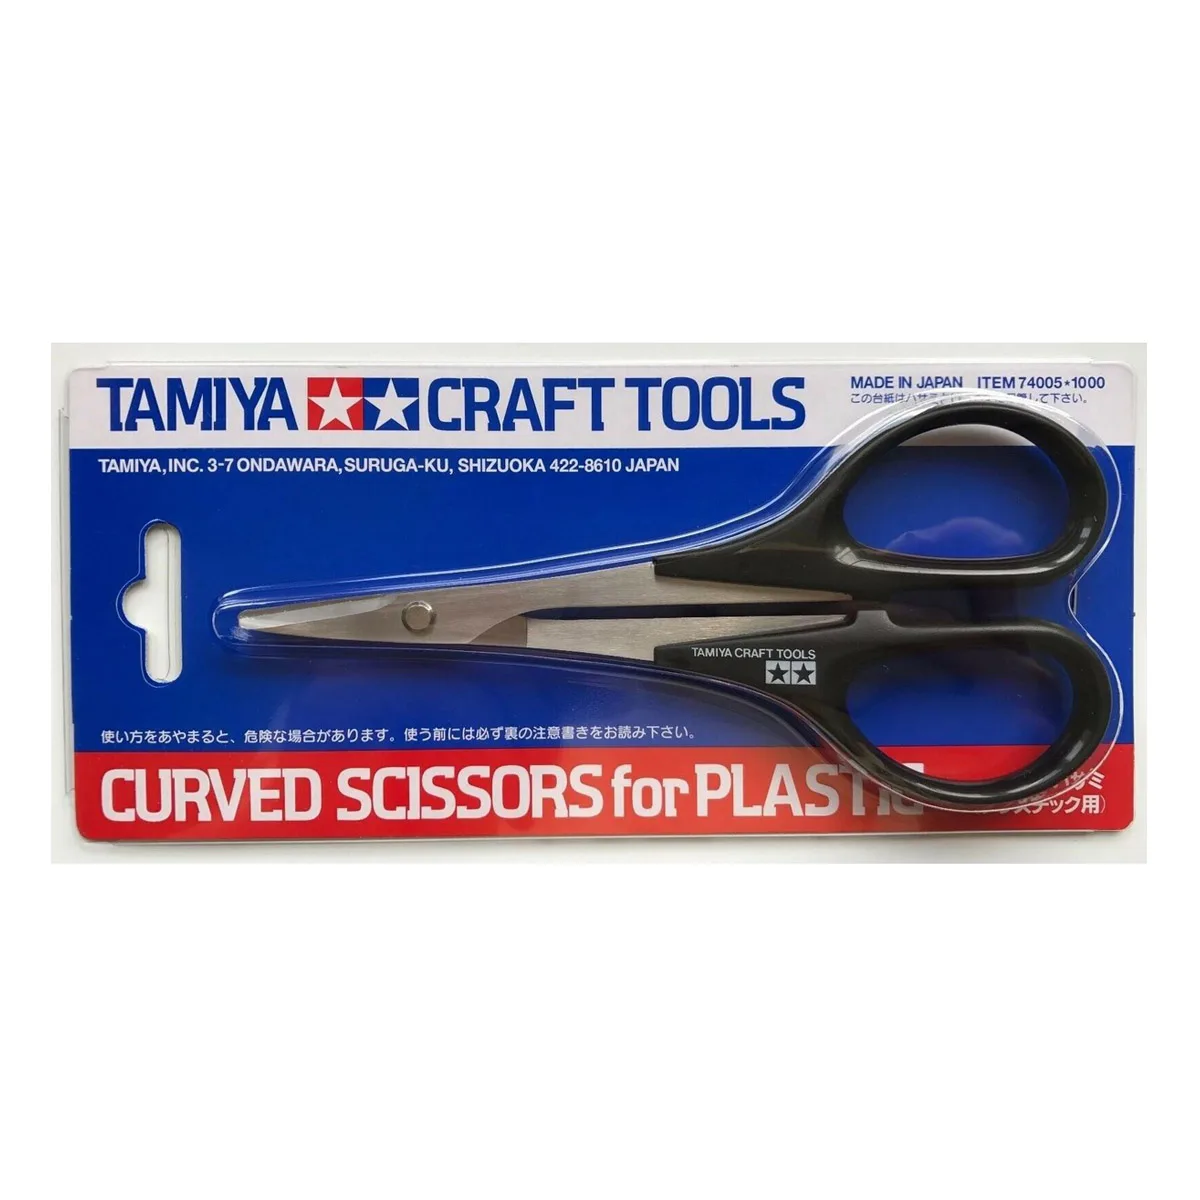 Tamiya RC Car Scissors Curved Tip Hard Stainless Steel RC Vehicle Boat Helicopter Plastic Bodyshell Canopies Tool 74005